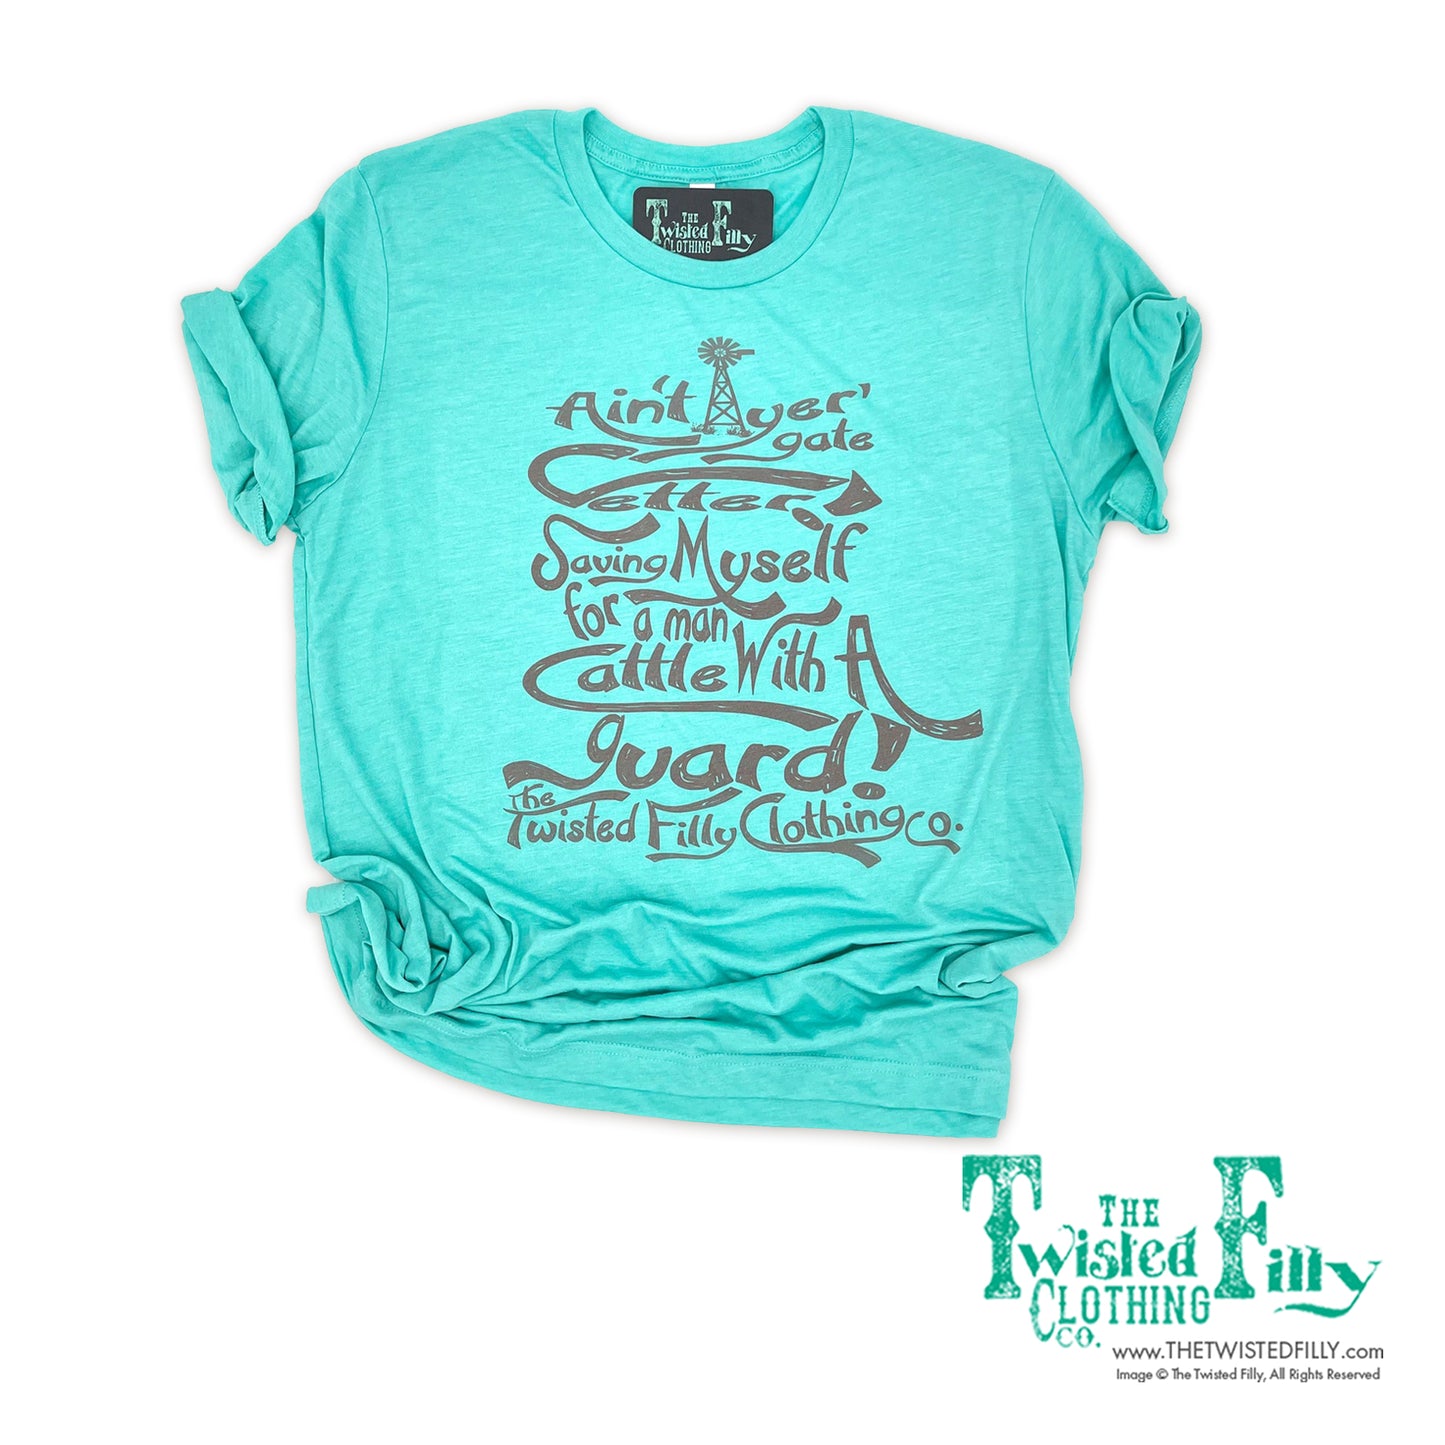 Ain't Yer Gate Getter - S/S Womens Crew Neck Tee - Turquoise